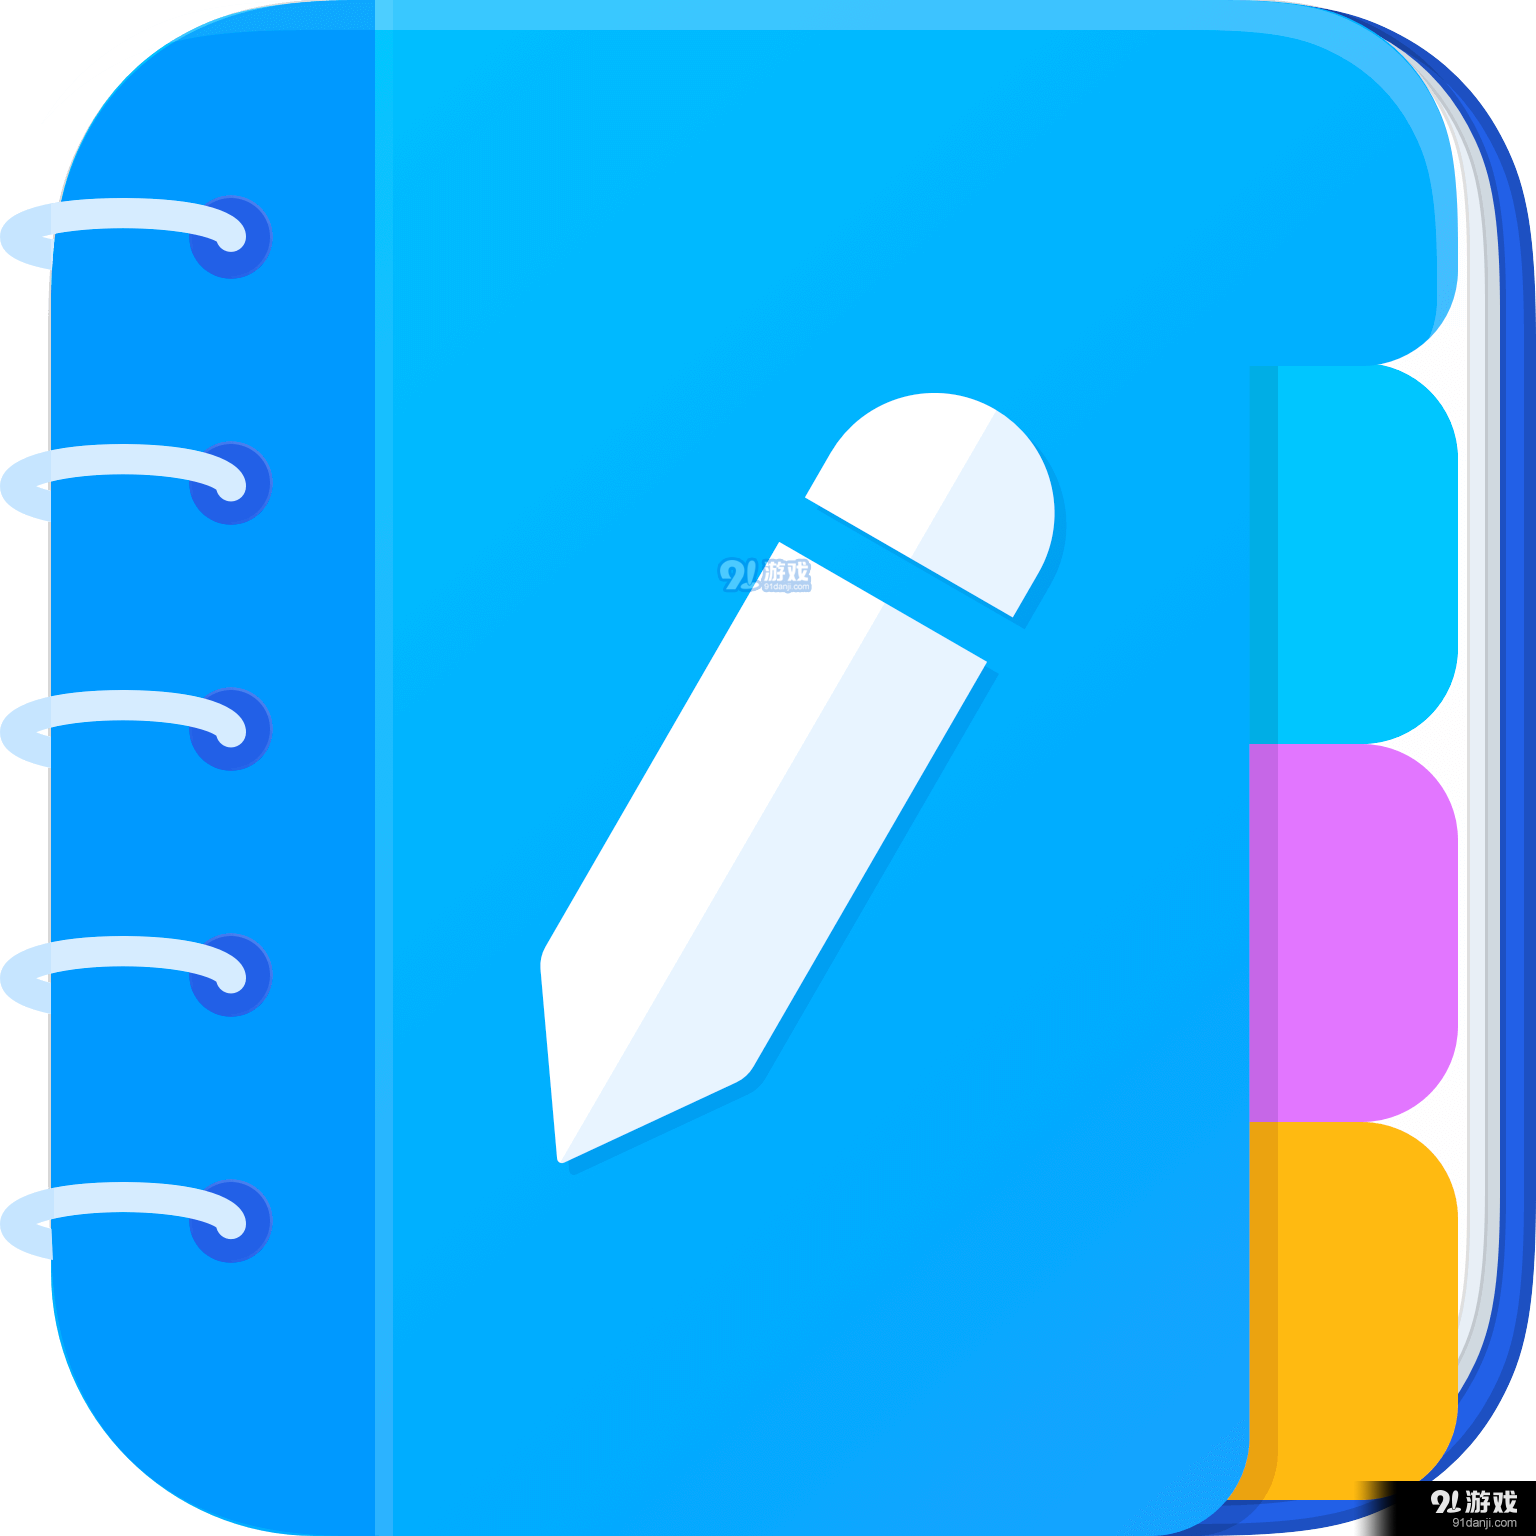 Easy Notes Pro